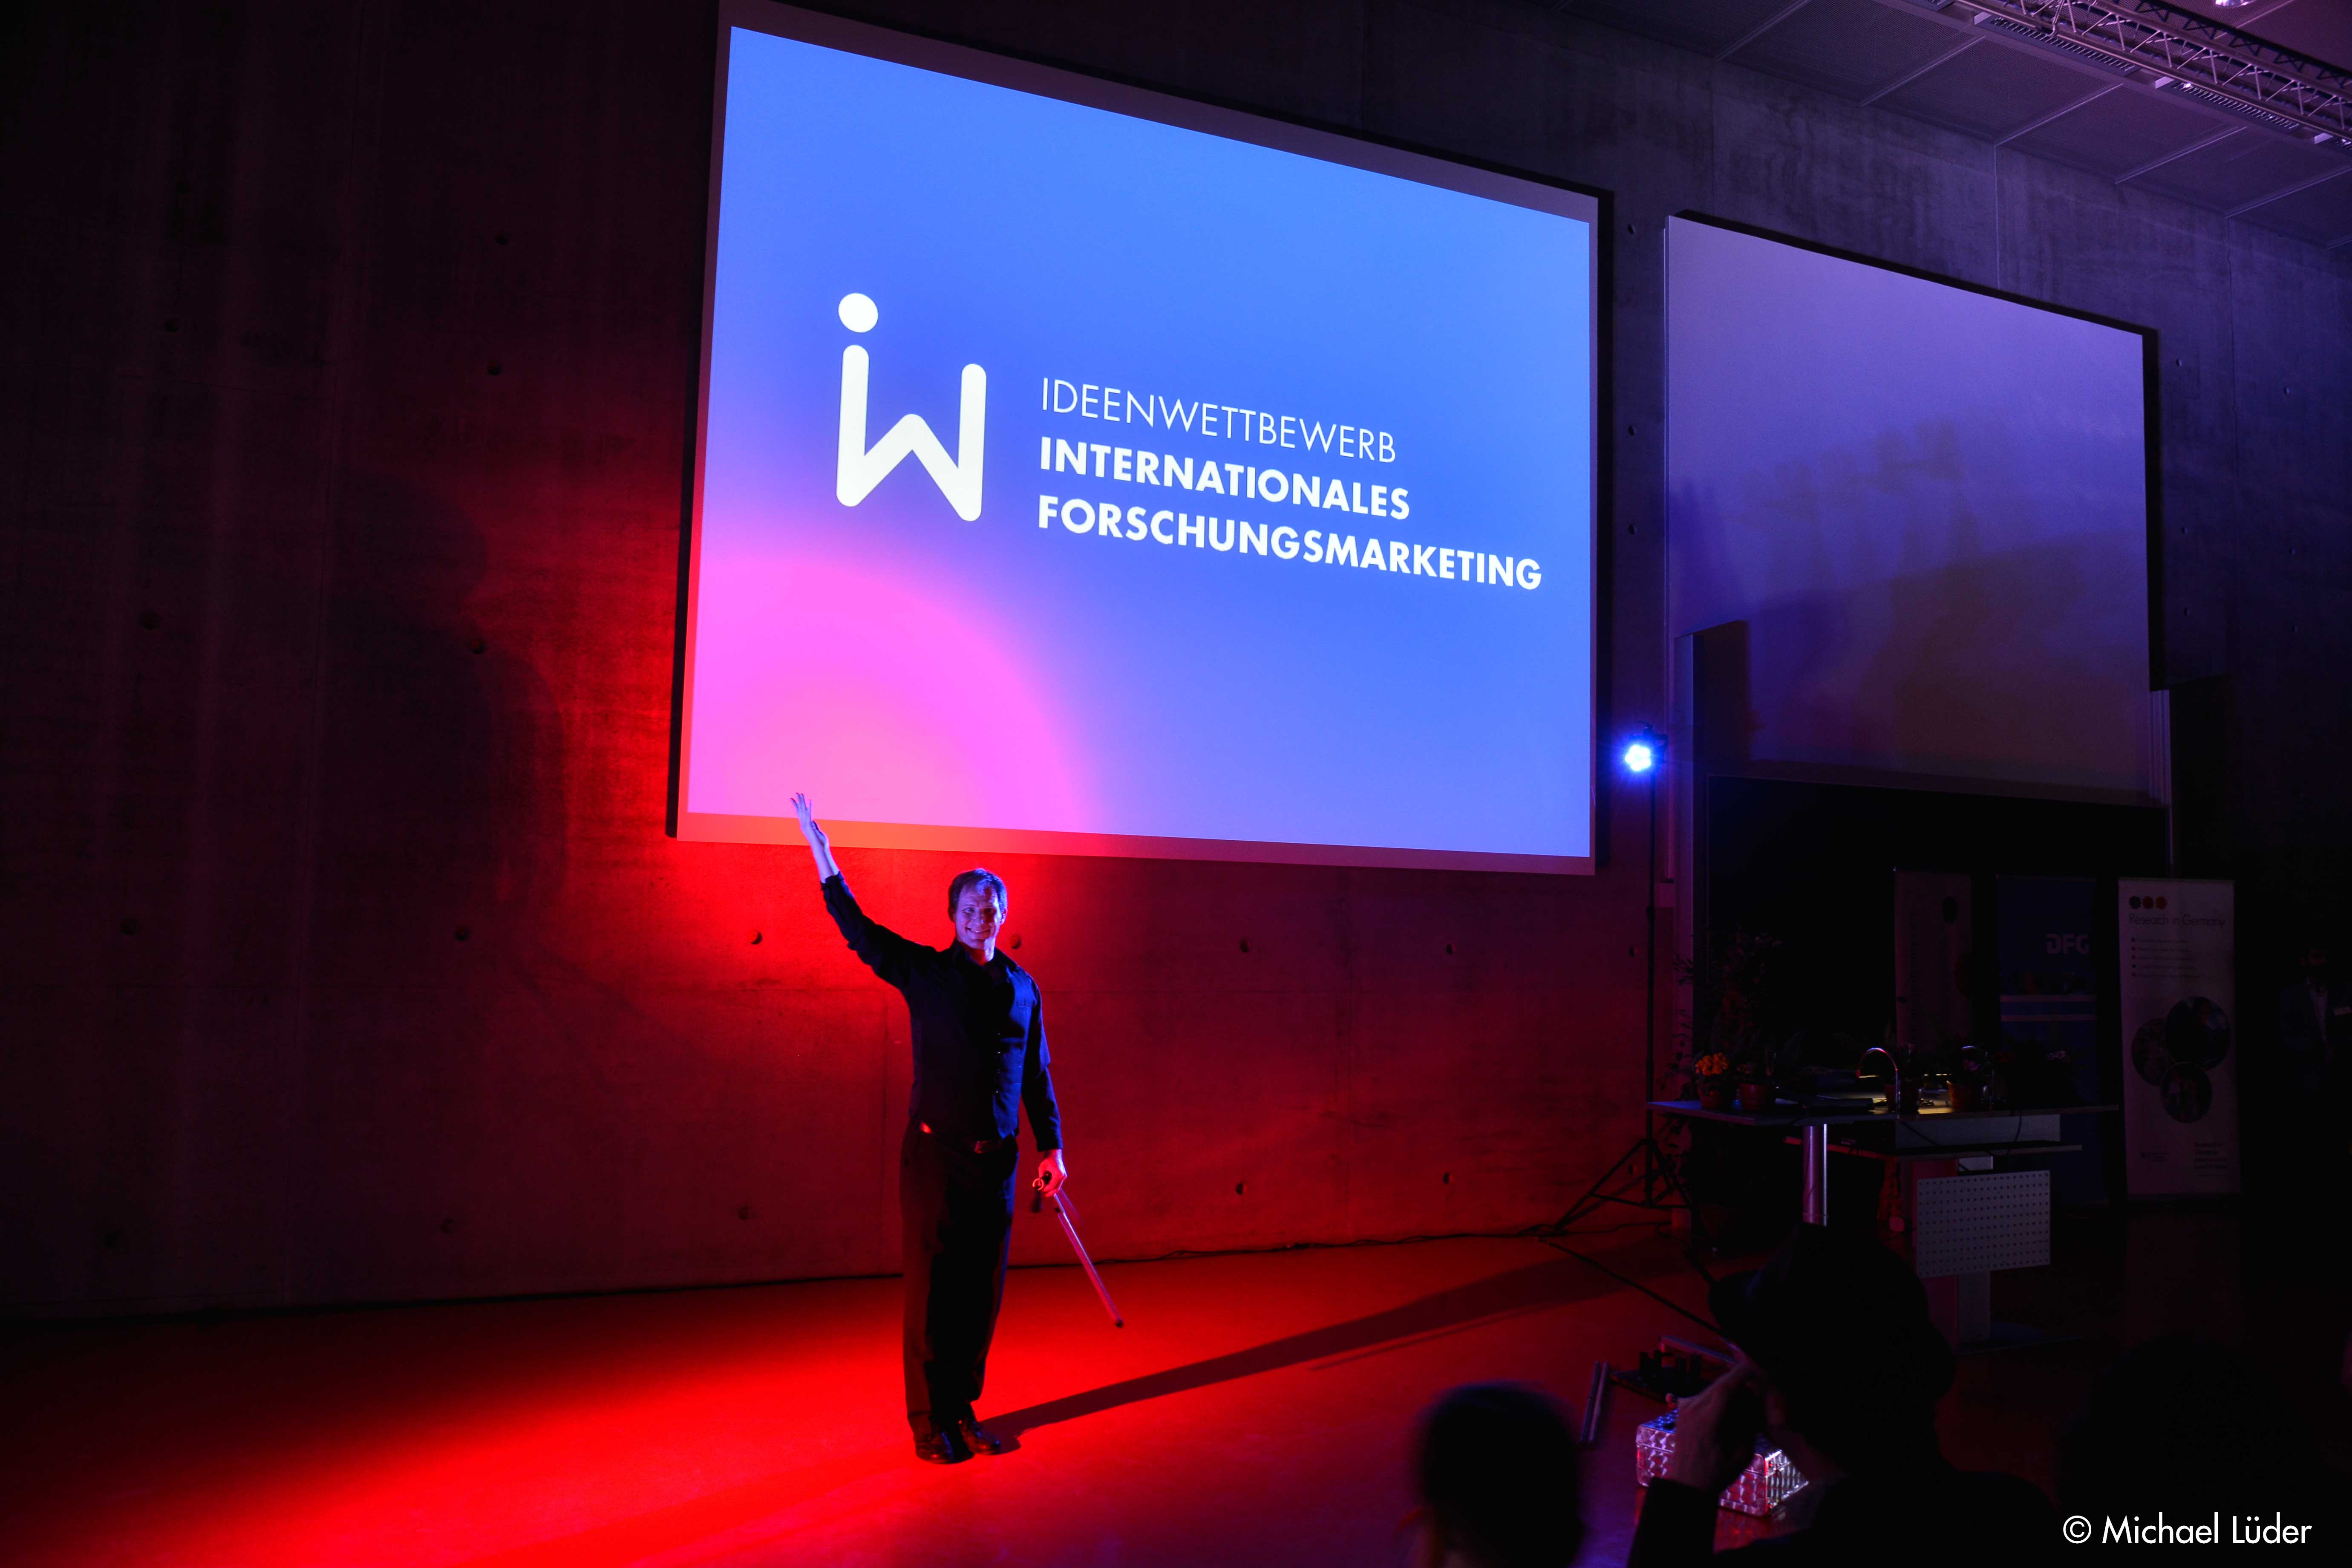 Light artist Till Pöhlmann at the award ceremony for the International Research Marketing ideas competition in 2016